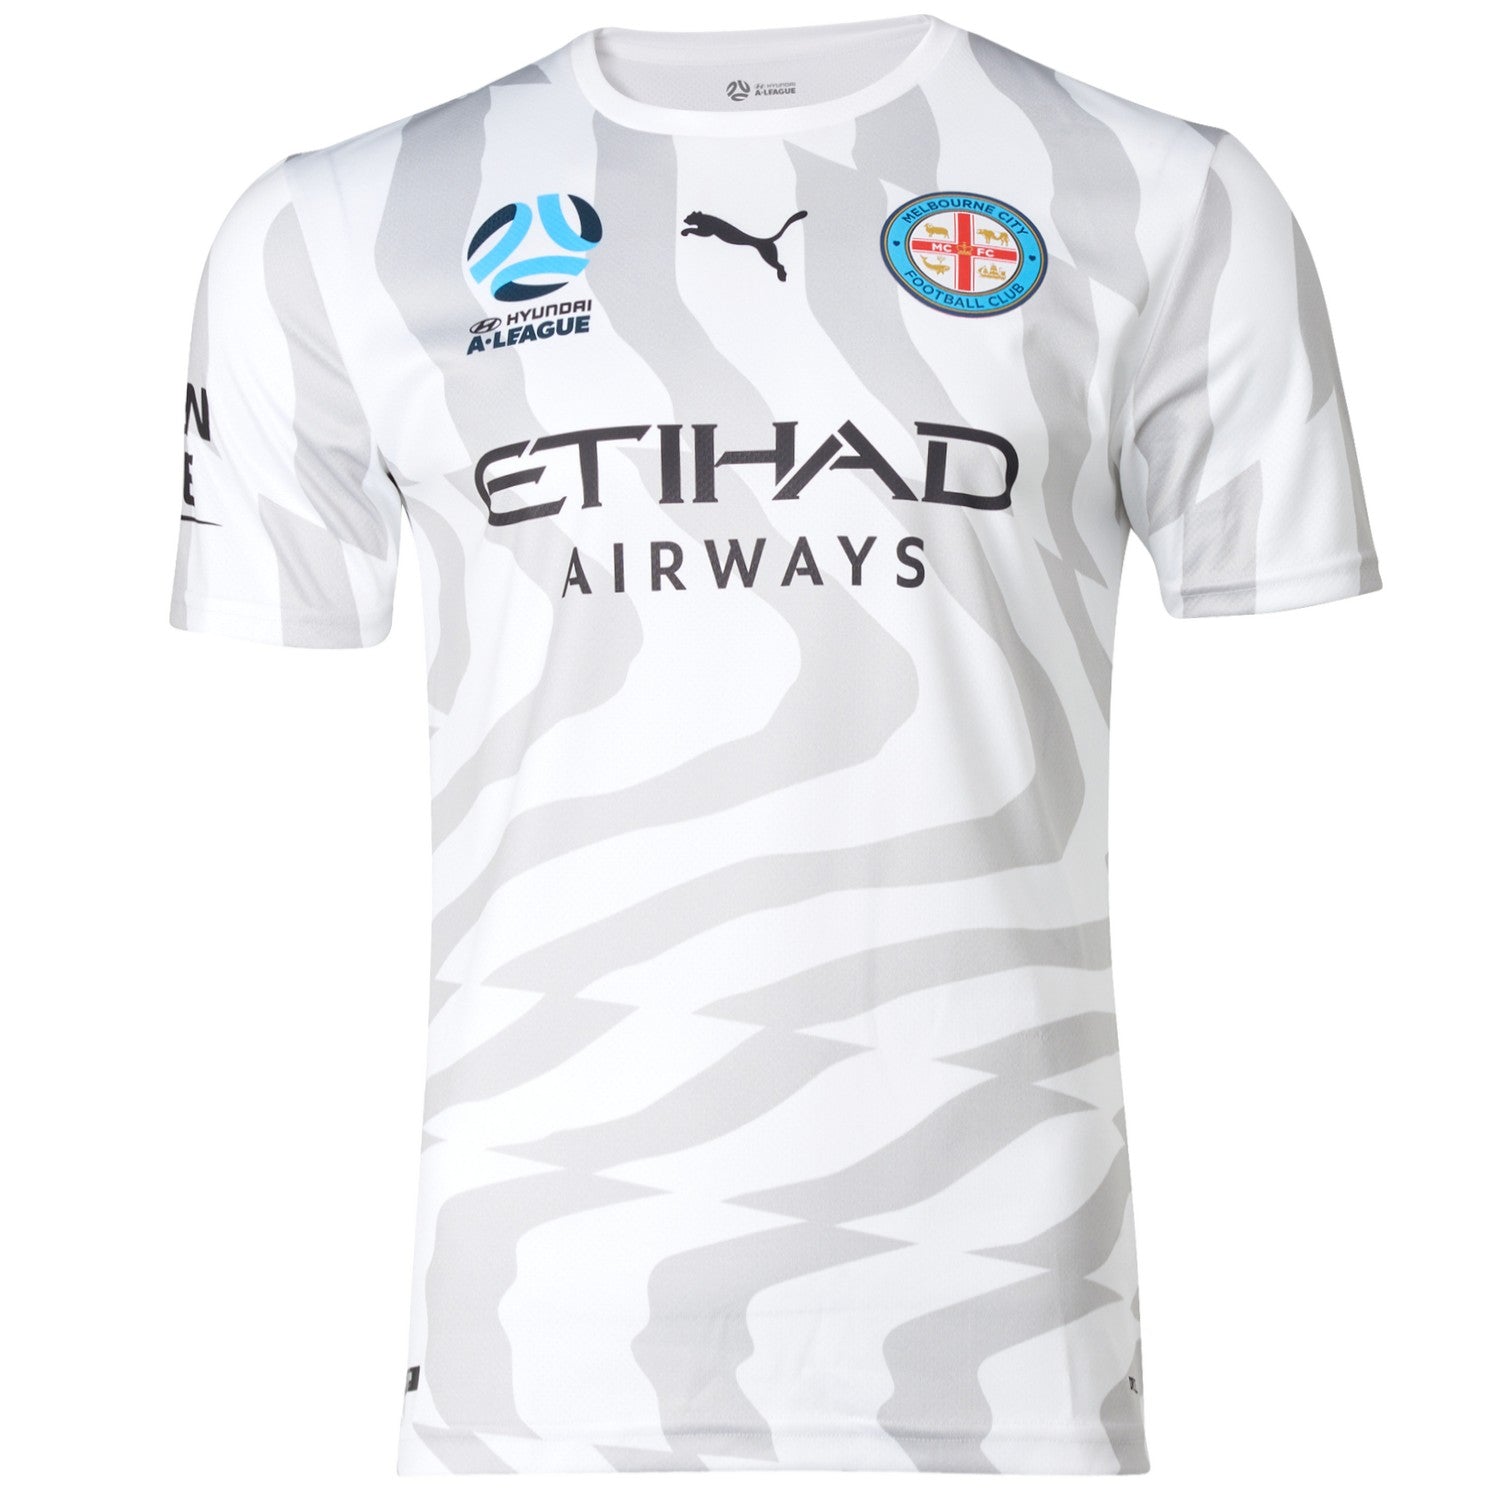 Melbourne City FC Away Soccer Jersey 2019/20 - Puma Adults Small